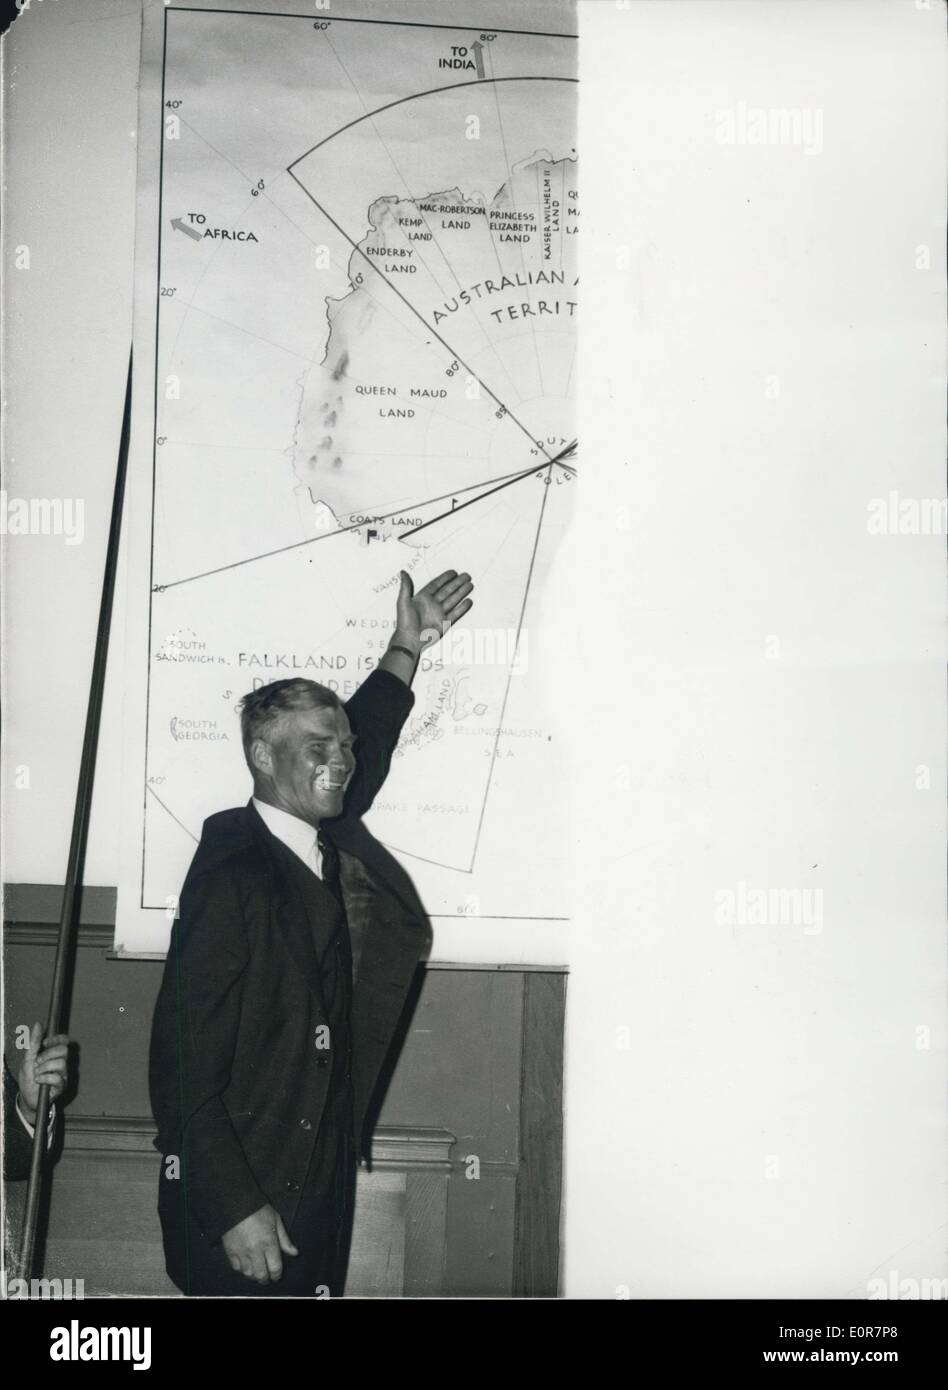 May 12, 1958 - Transantarctic Expedition returns to London: Dr. Vivian Fuchs and members of his Transantarctic Expedition-returned to London this afternoon and received a great welcome. A press reception was held at the Royal Geographical Society Headquarters. Photo shows Dr.Fuchs points out his route on a well map of Antarctica-at the press reception this afternoon. Stock Photo